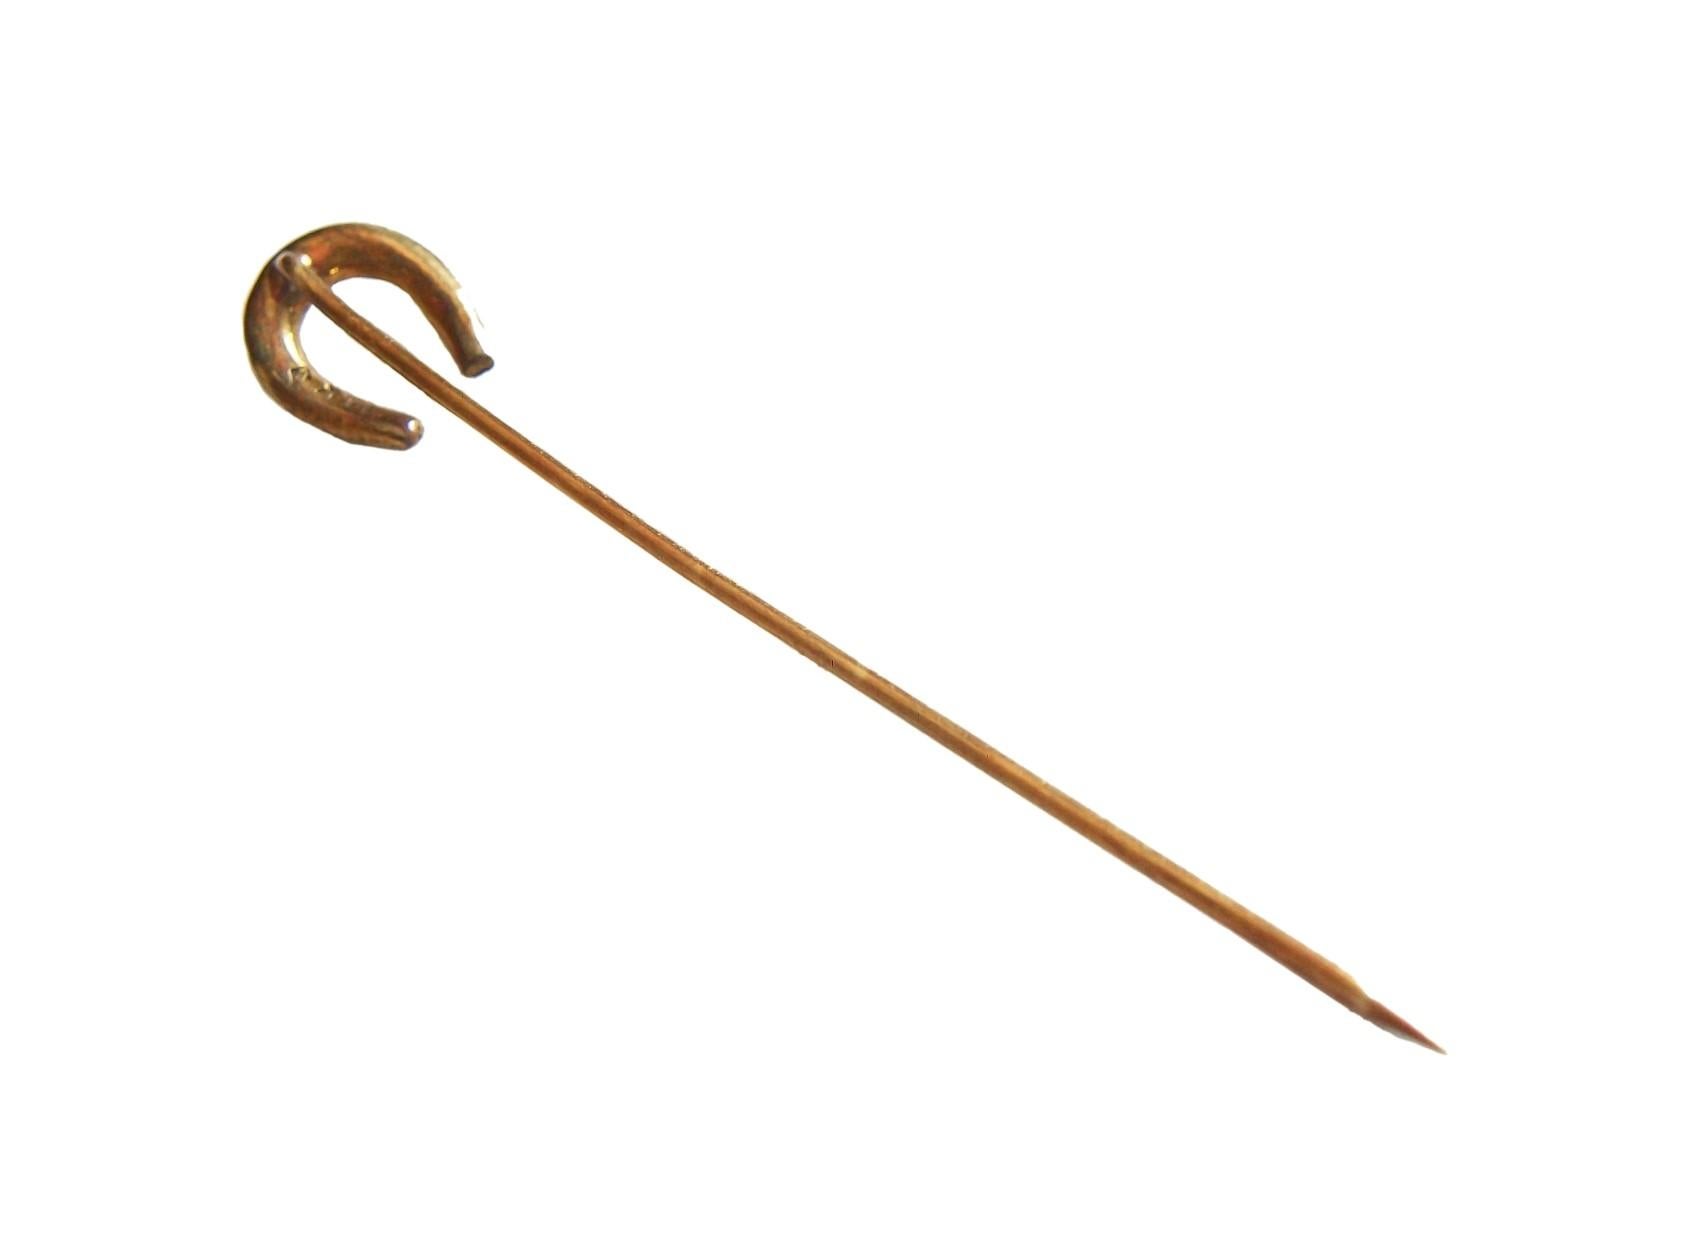 Ehlers & Co., 14k Gold Horseshoe Stick Pin with Seed Pearls, U.S., circa 1900 In Good Condition For Sale In Chatham, CA